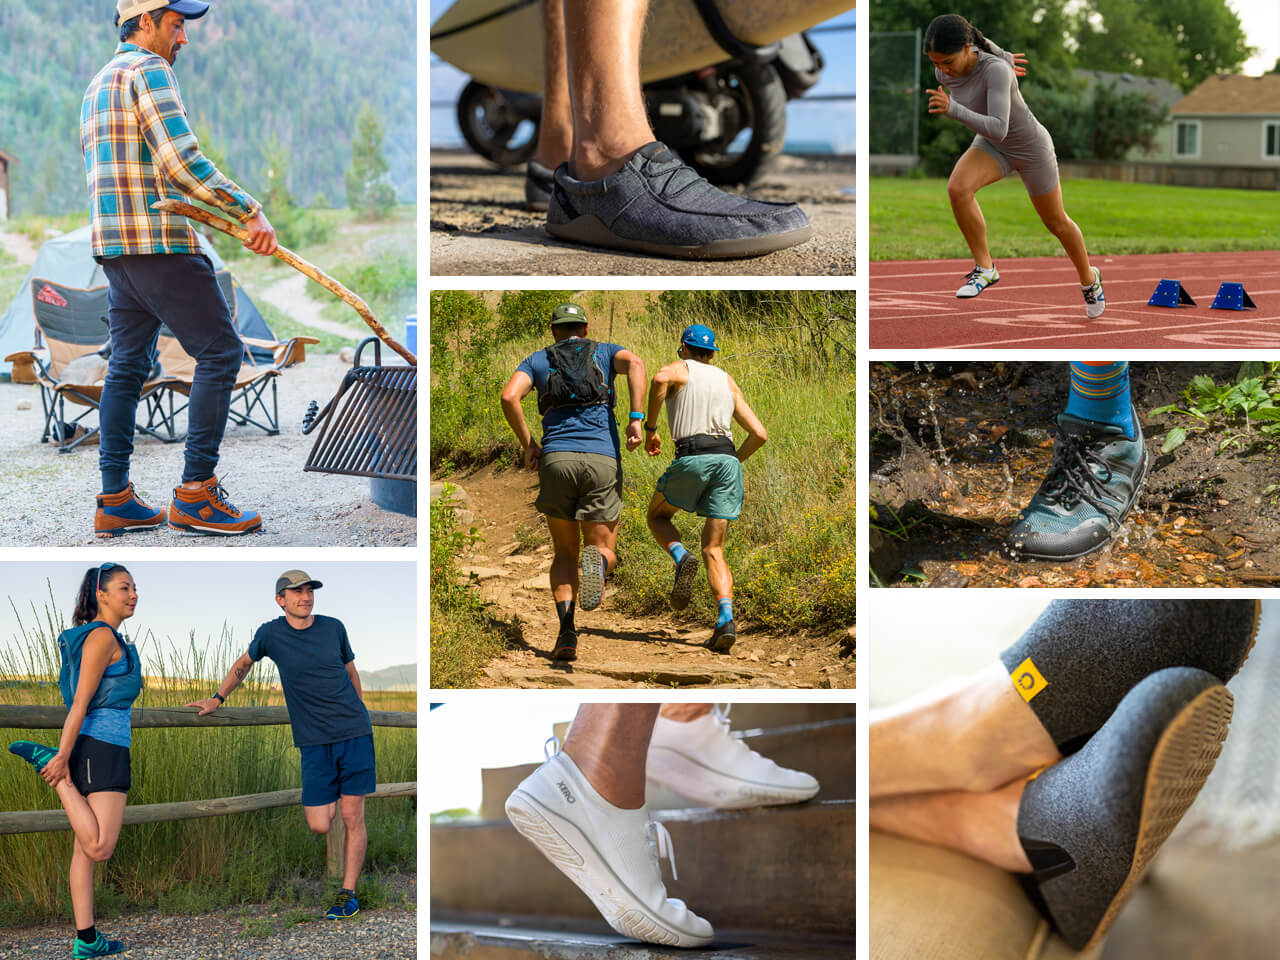 Barefoot Shoes for Running, Hiking, and Walking - Xero Shoes